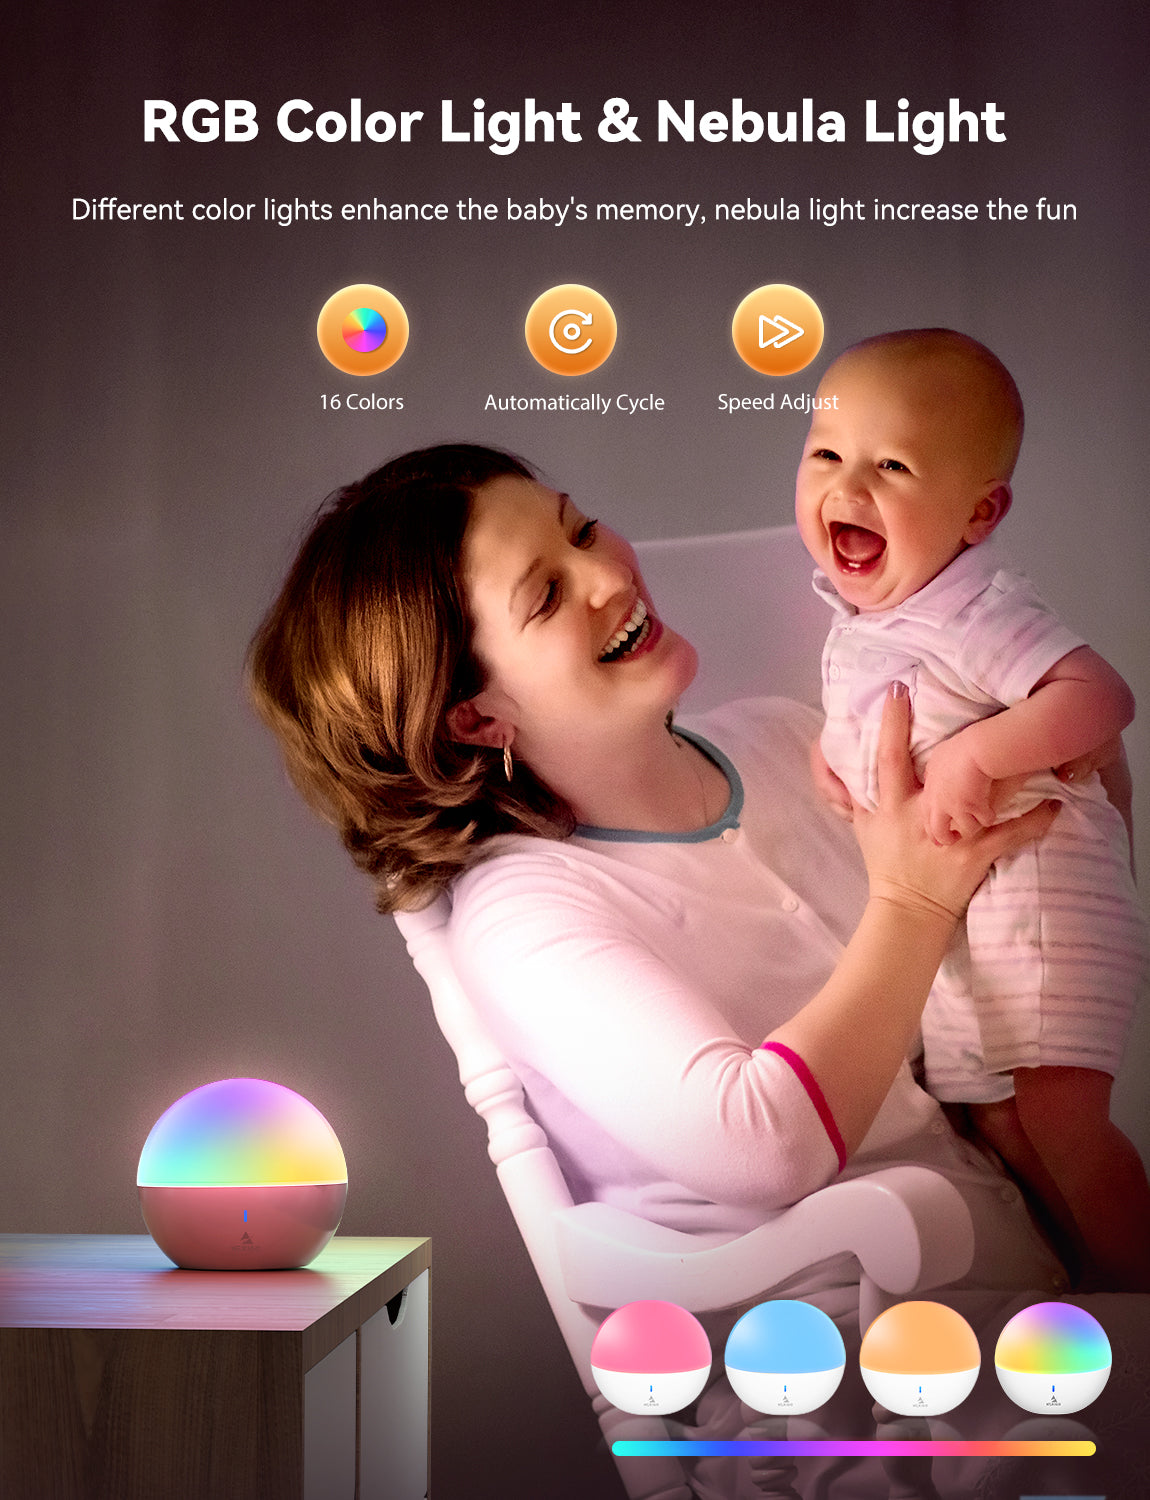 Mom playing with the baby, the changing night light adds fun for the baby.